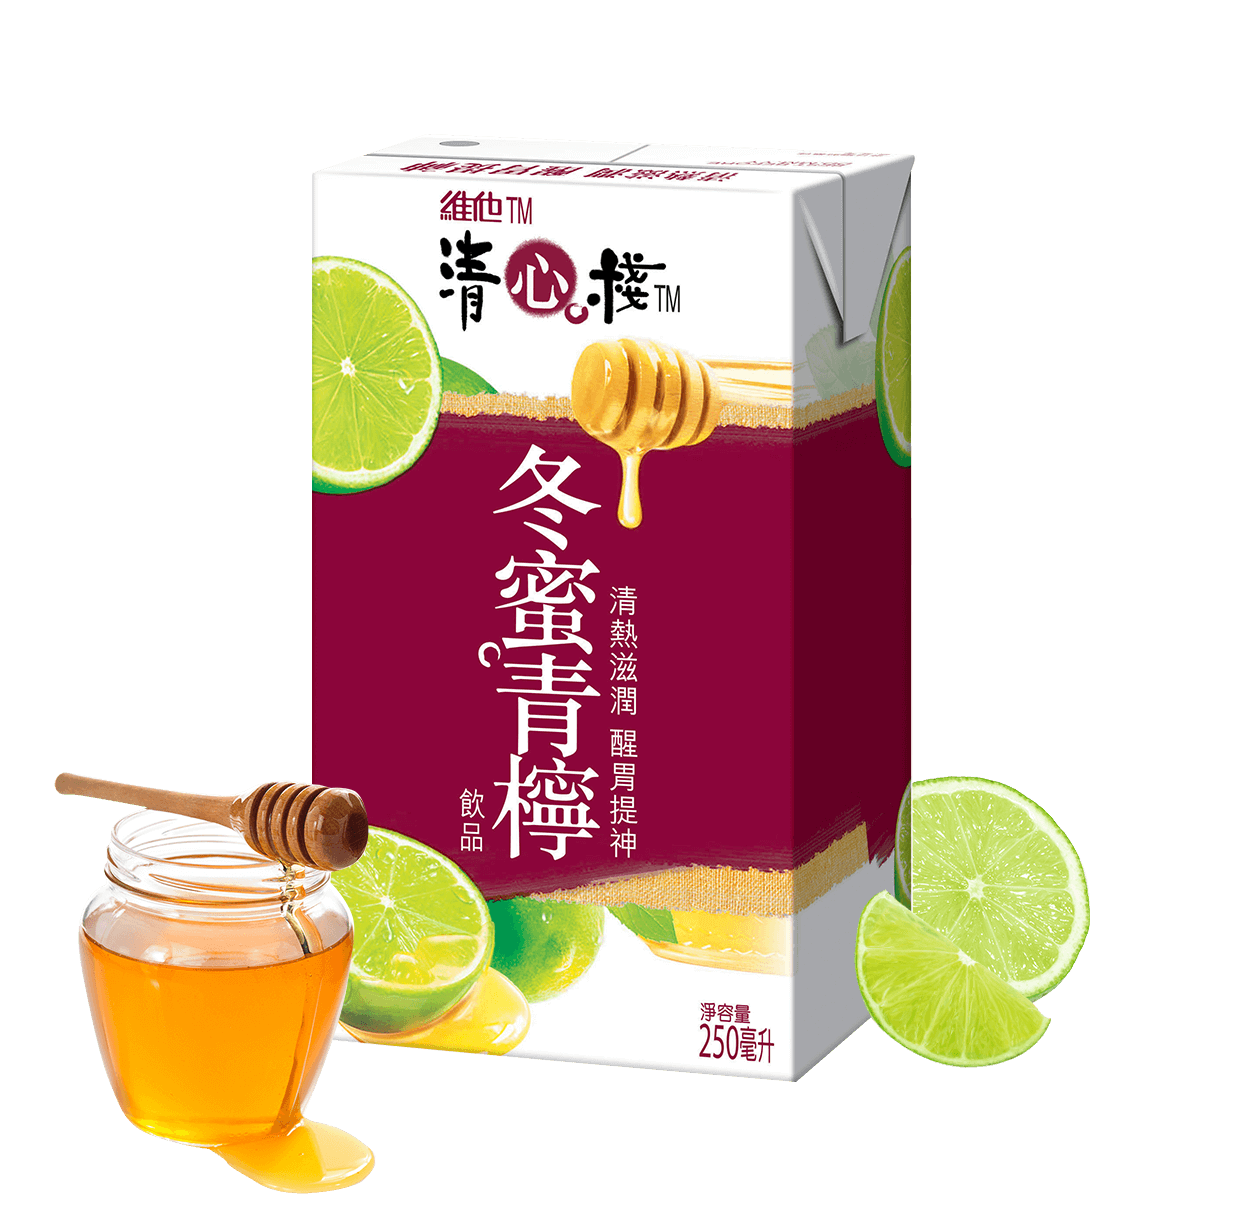 limit-2-per-order-vita-winter-honey-and-lime-drink